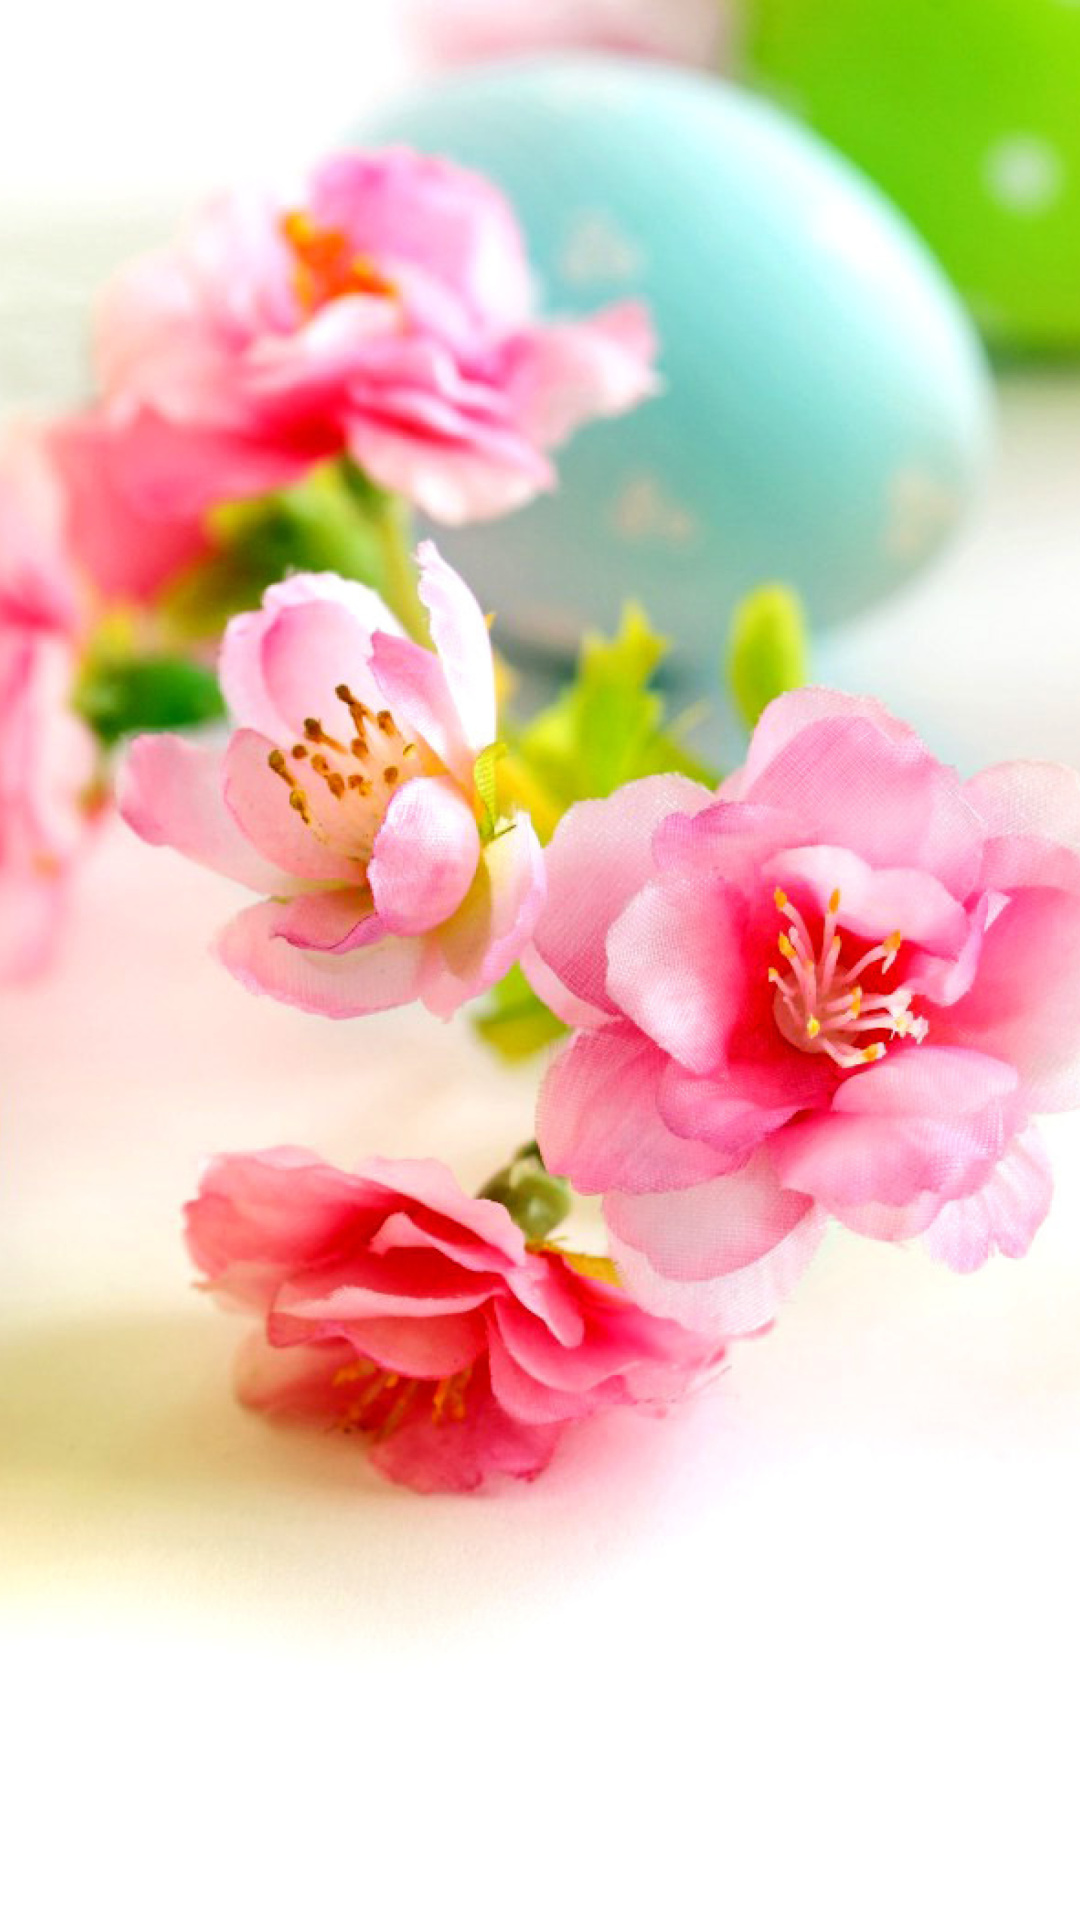 Easter Eggs and Spring Flowers wallpaper 1080x1920